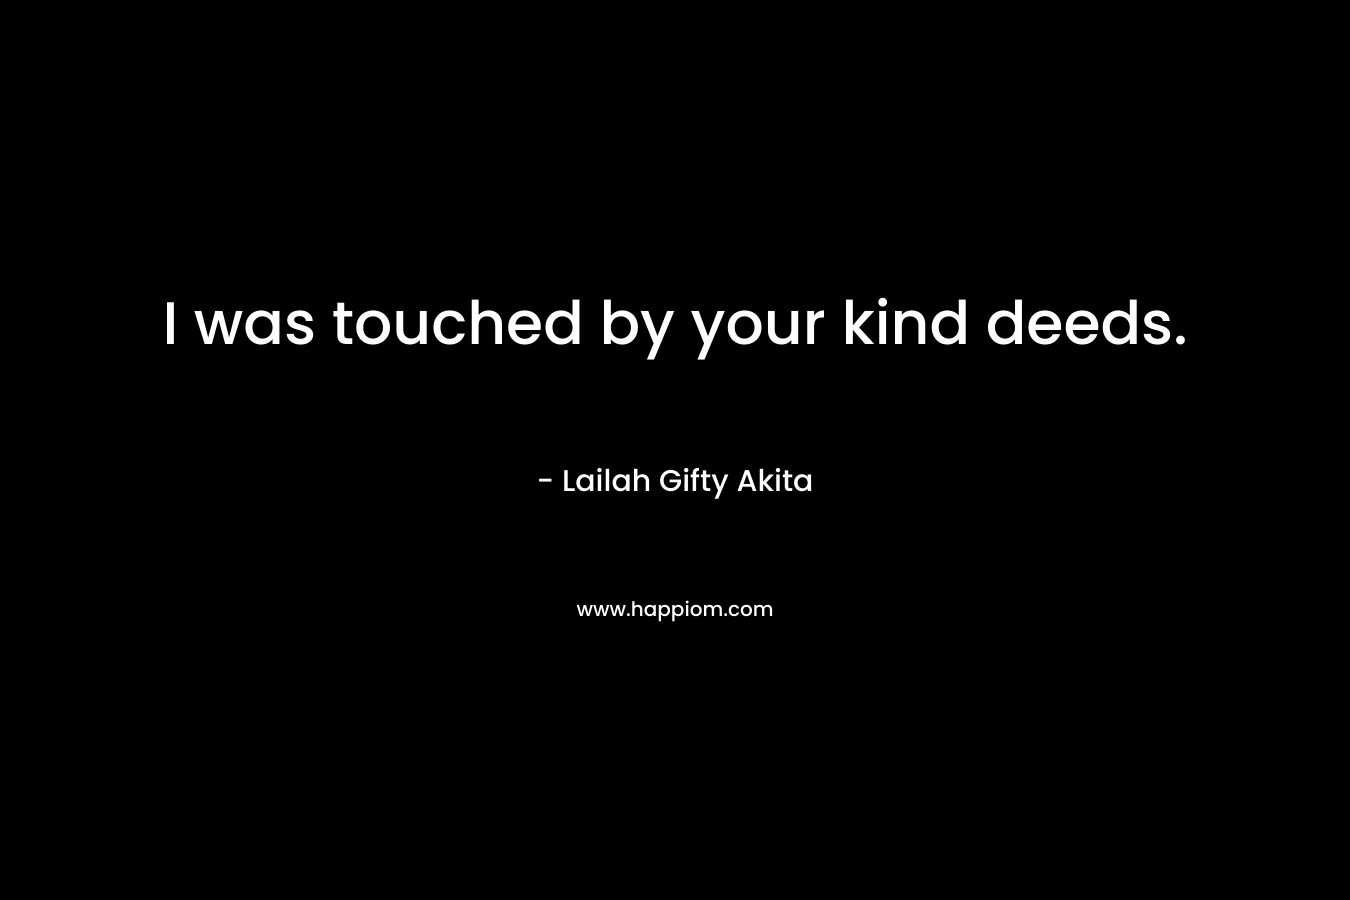 I was touched by your kind deeds.